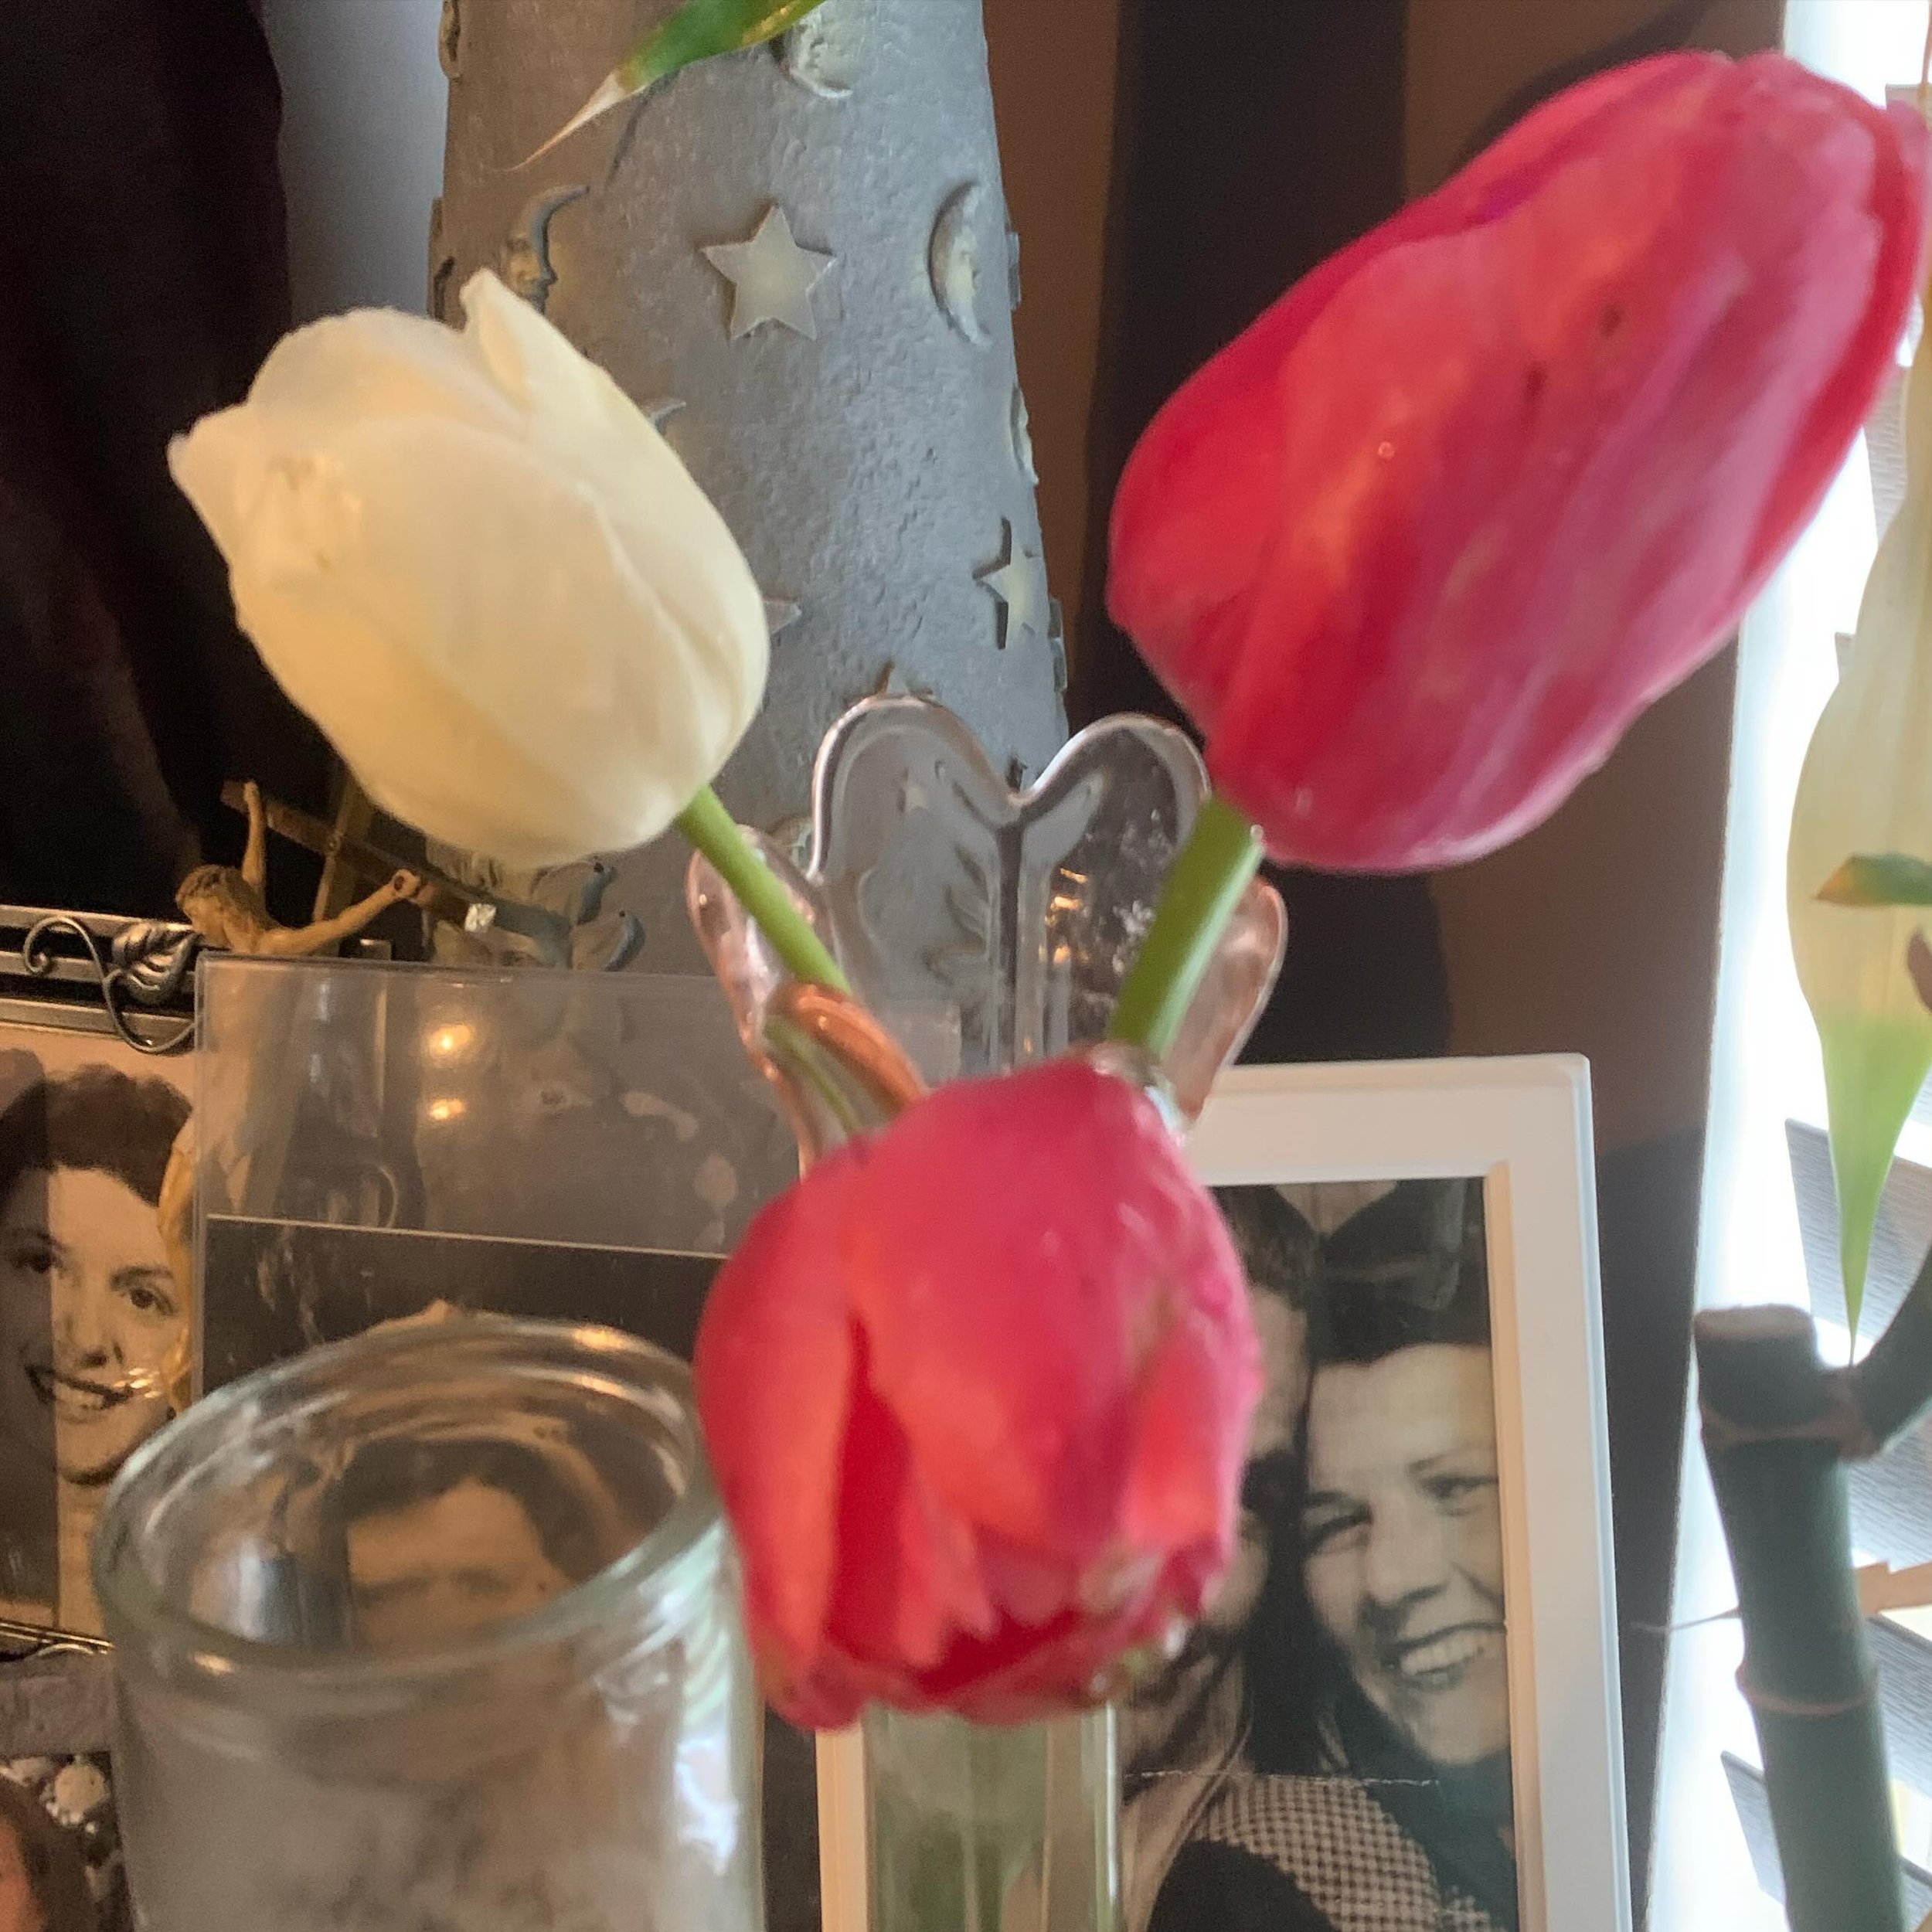 Almost picked up flowers at the store but something told me not to do it. Came home and saw I had hidden on the other side of the tree on the parkway, these 3 lovely Tulips. Instead of letting them get beaten up by the incoming storm, I brought them 